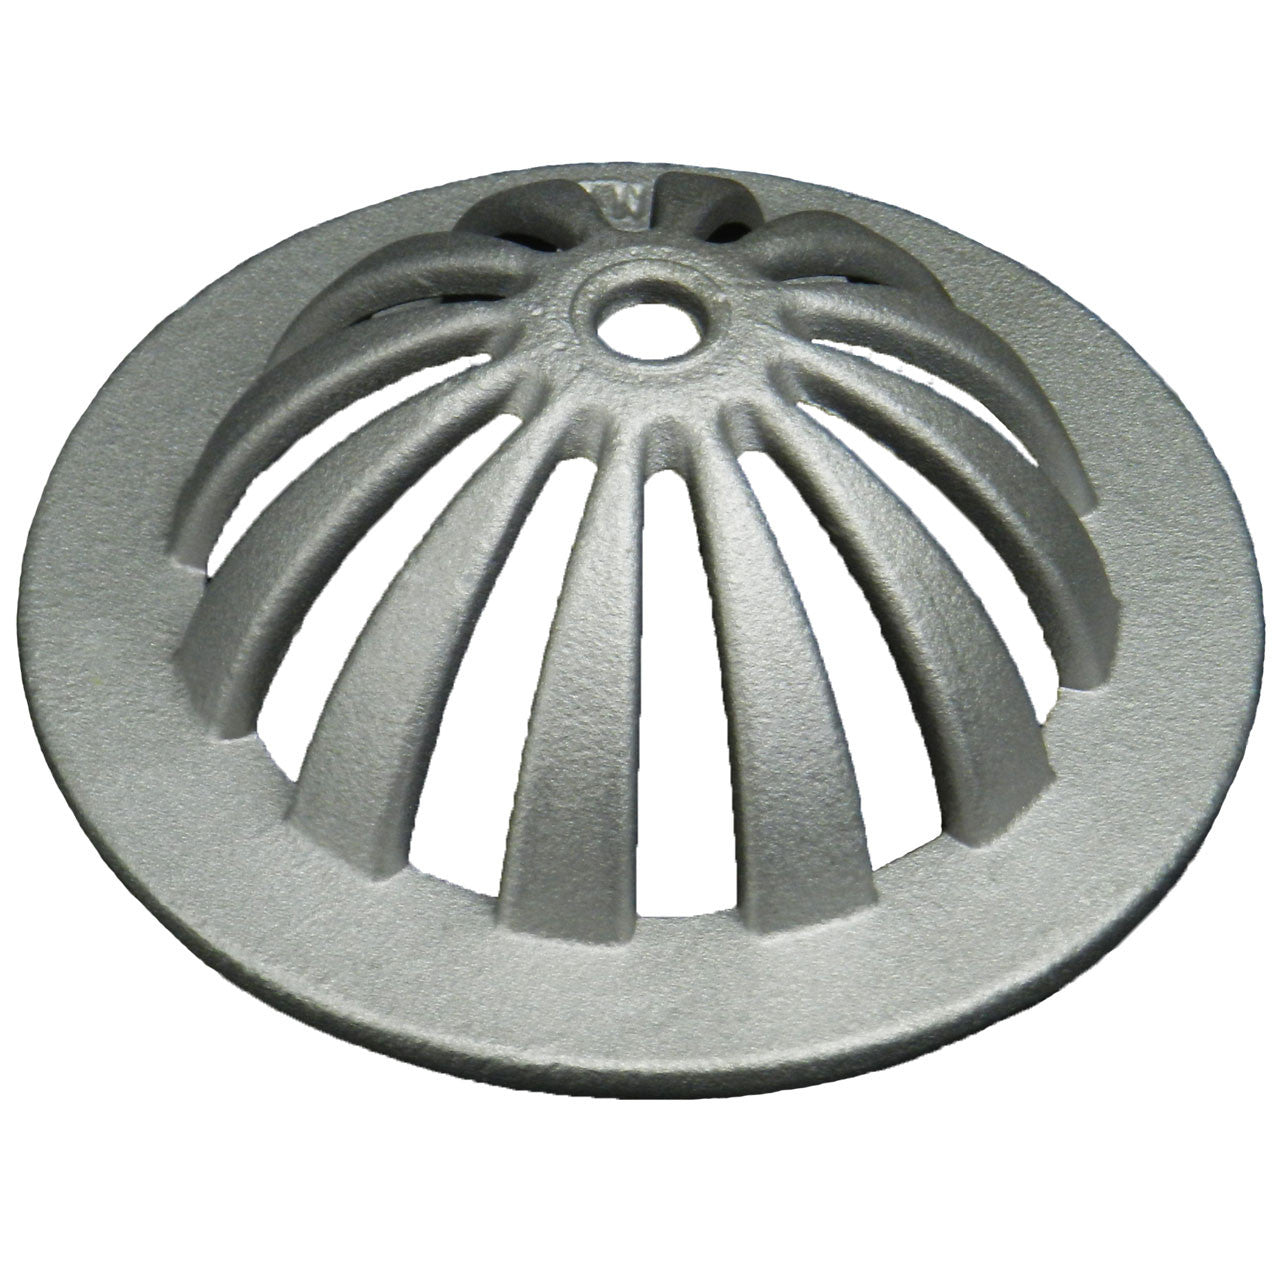 Secondary Aluminum Dome Strainer for Deep Sump (SPB99A-080434414895)